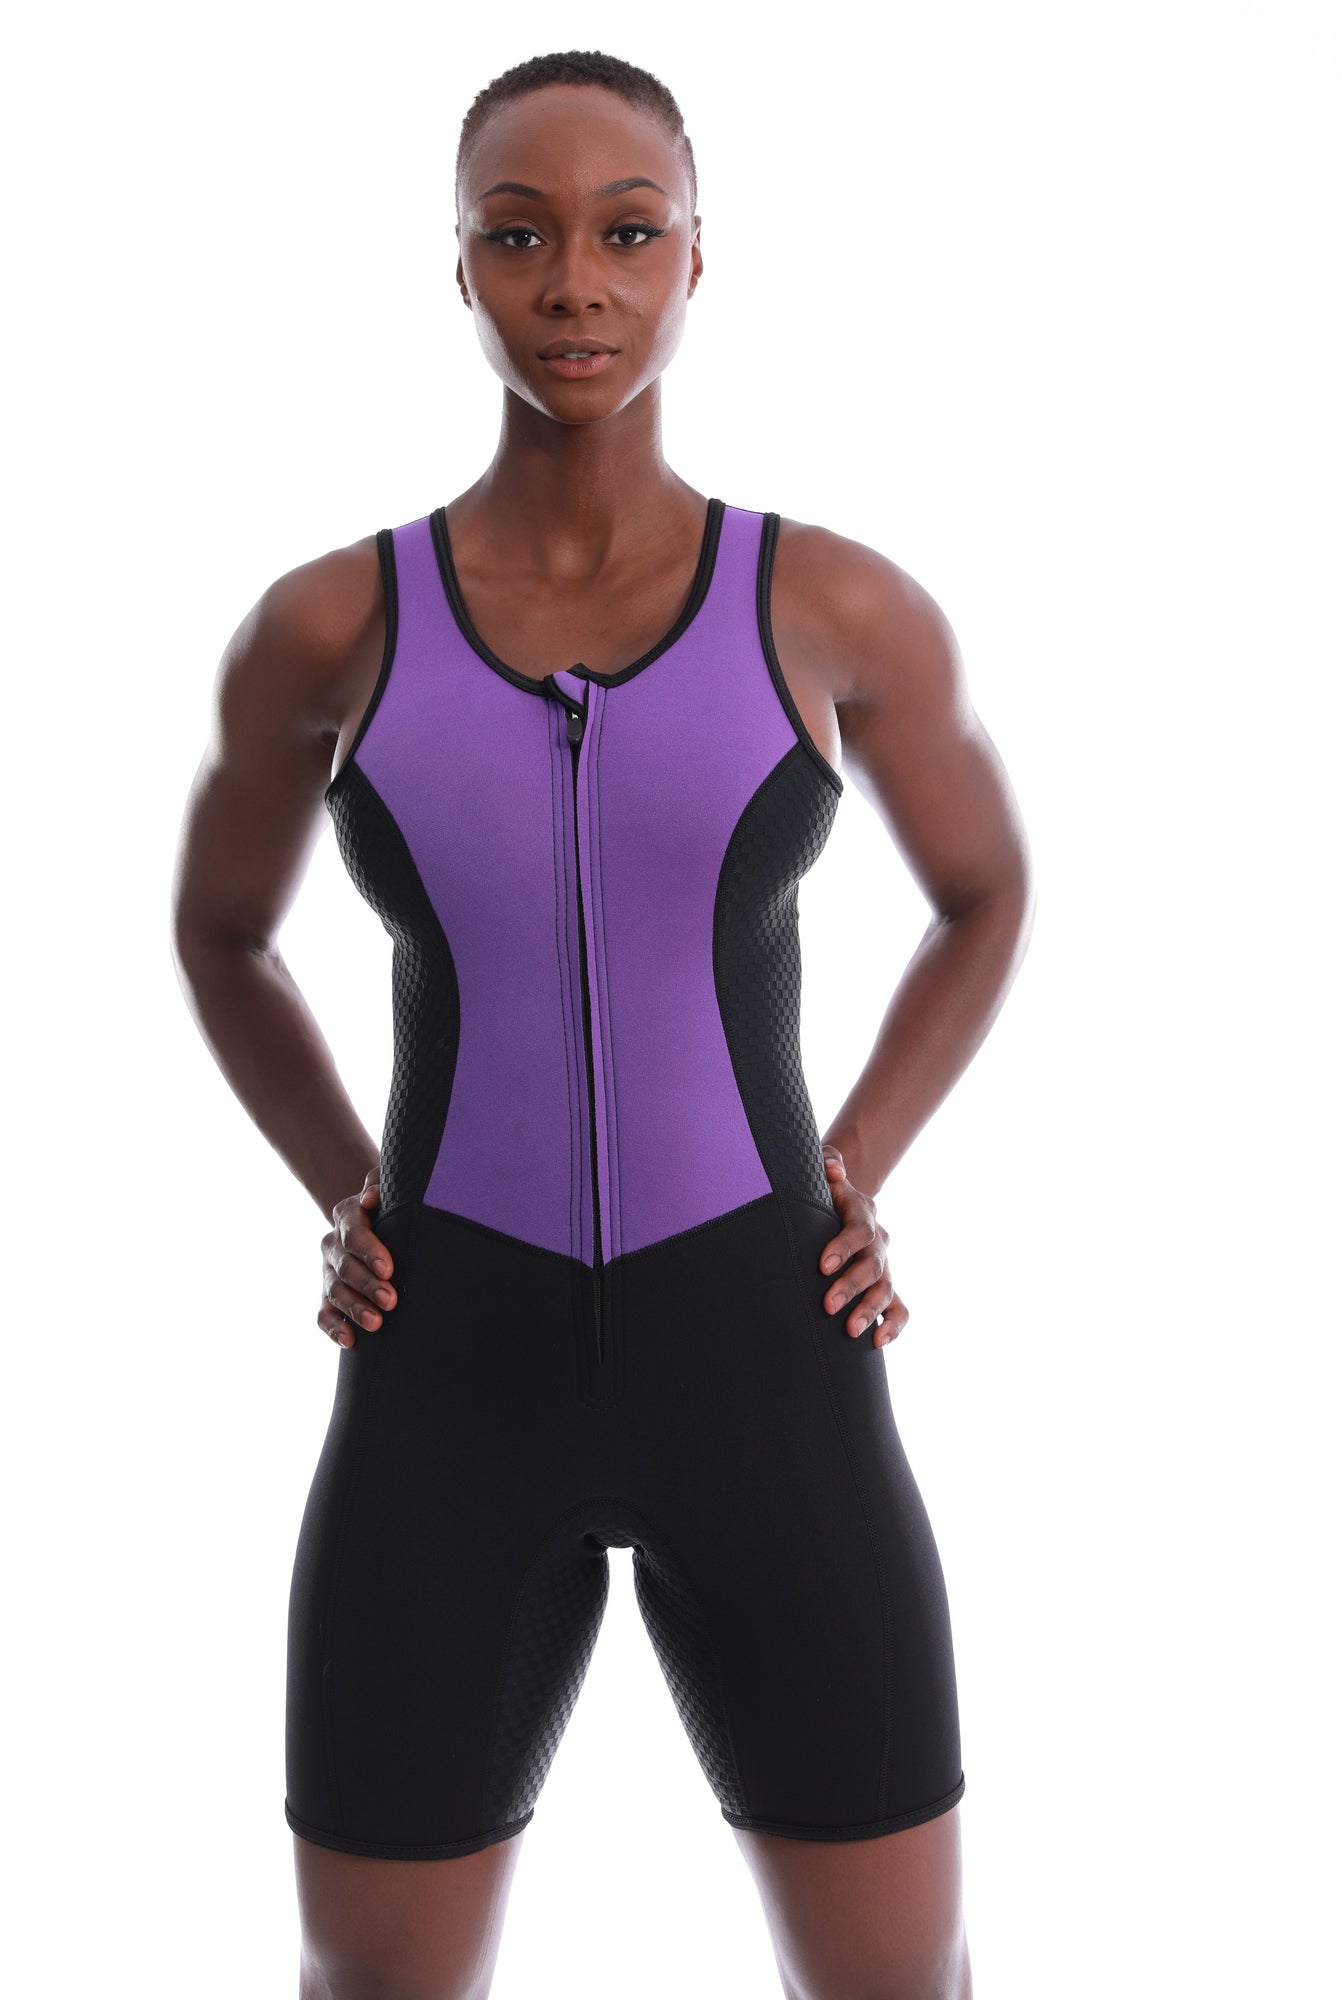 QUAFORT Full Body Shapewear Sauna Suit Neoprene Weight Loss Gym Shapers  with